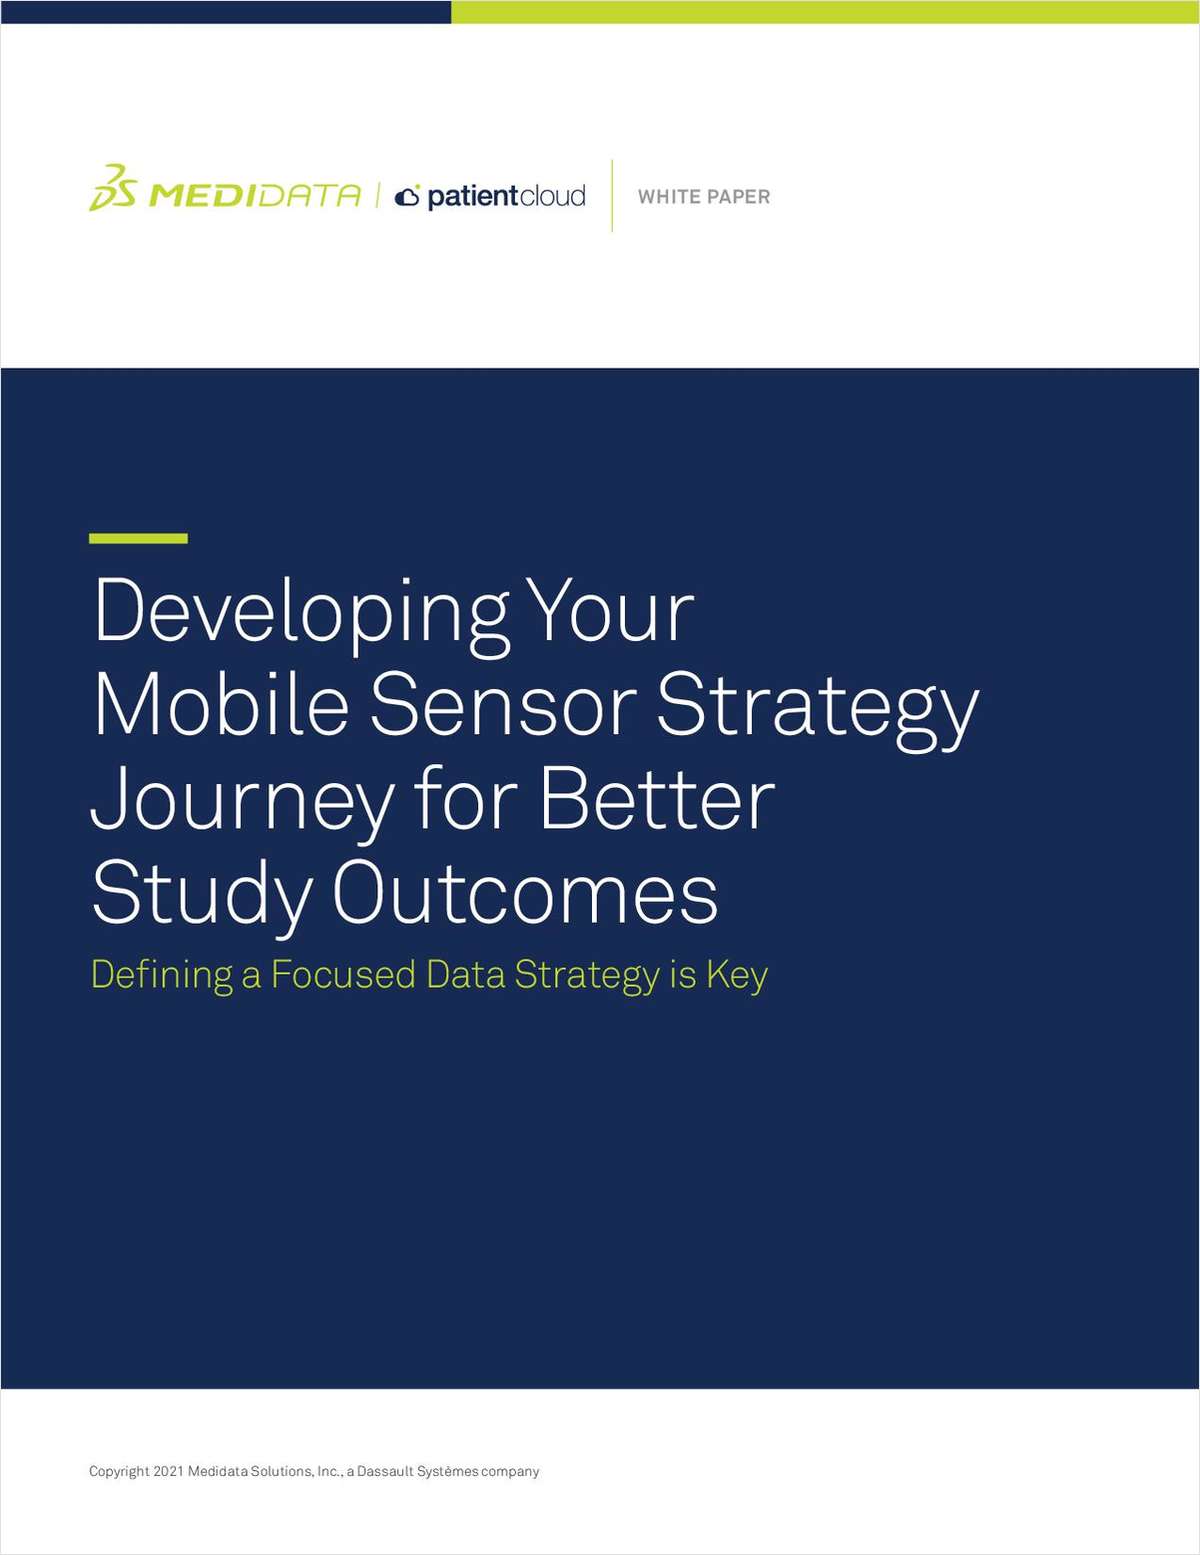 Developing Your Mobile Sensor Strategy Journey for Better Study Outcomes